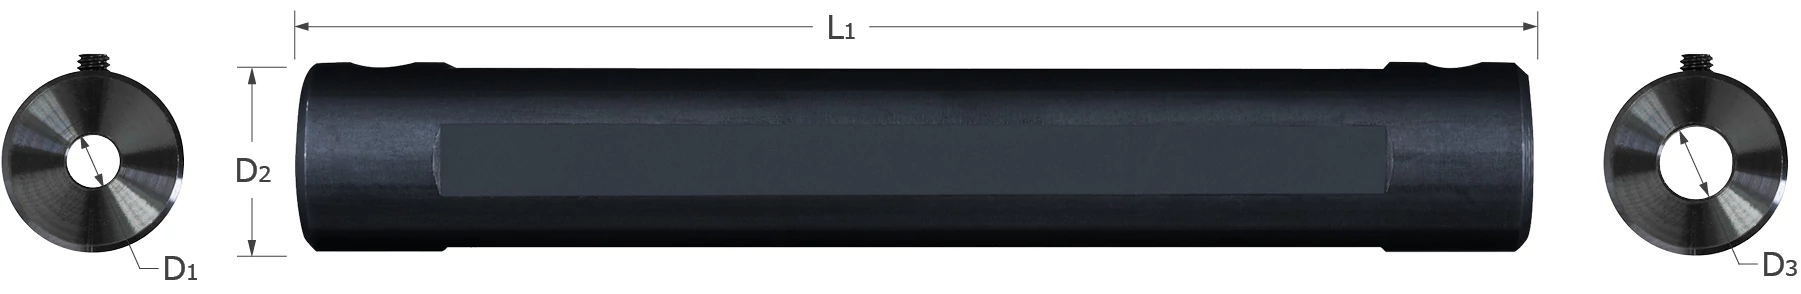 Standard Holders-Double-Ended-Dissimilar ID